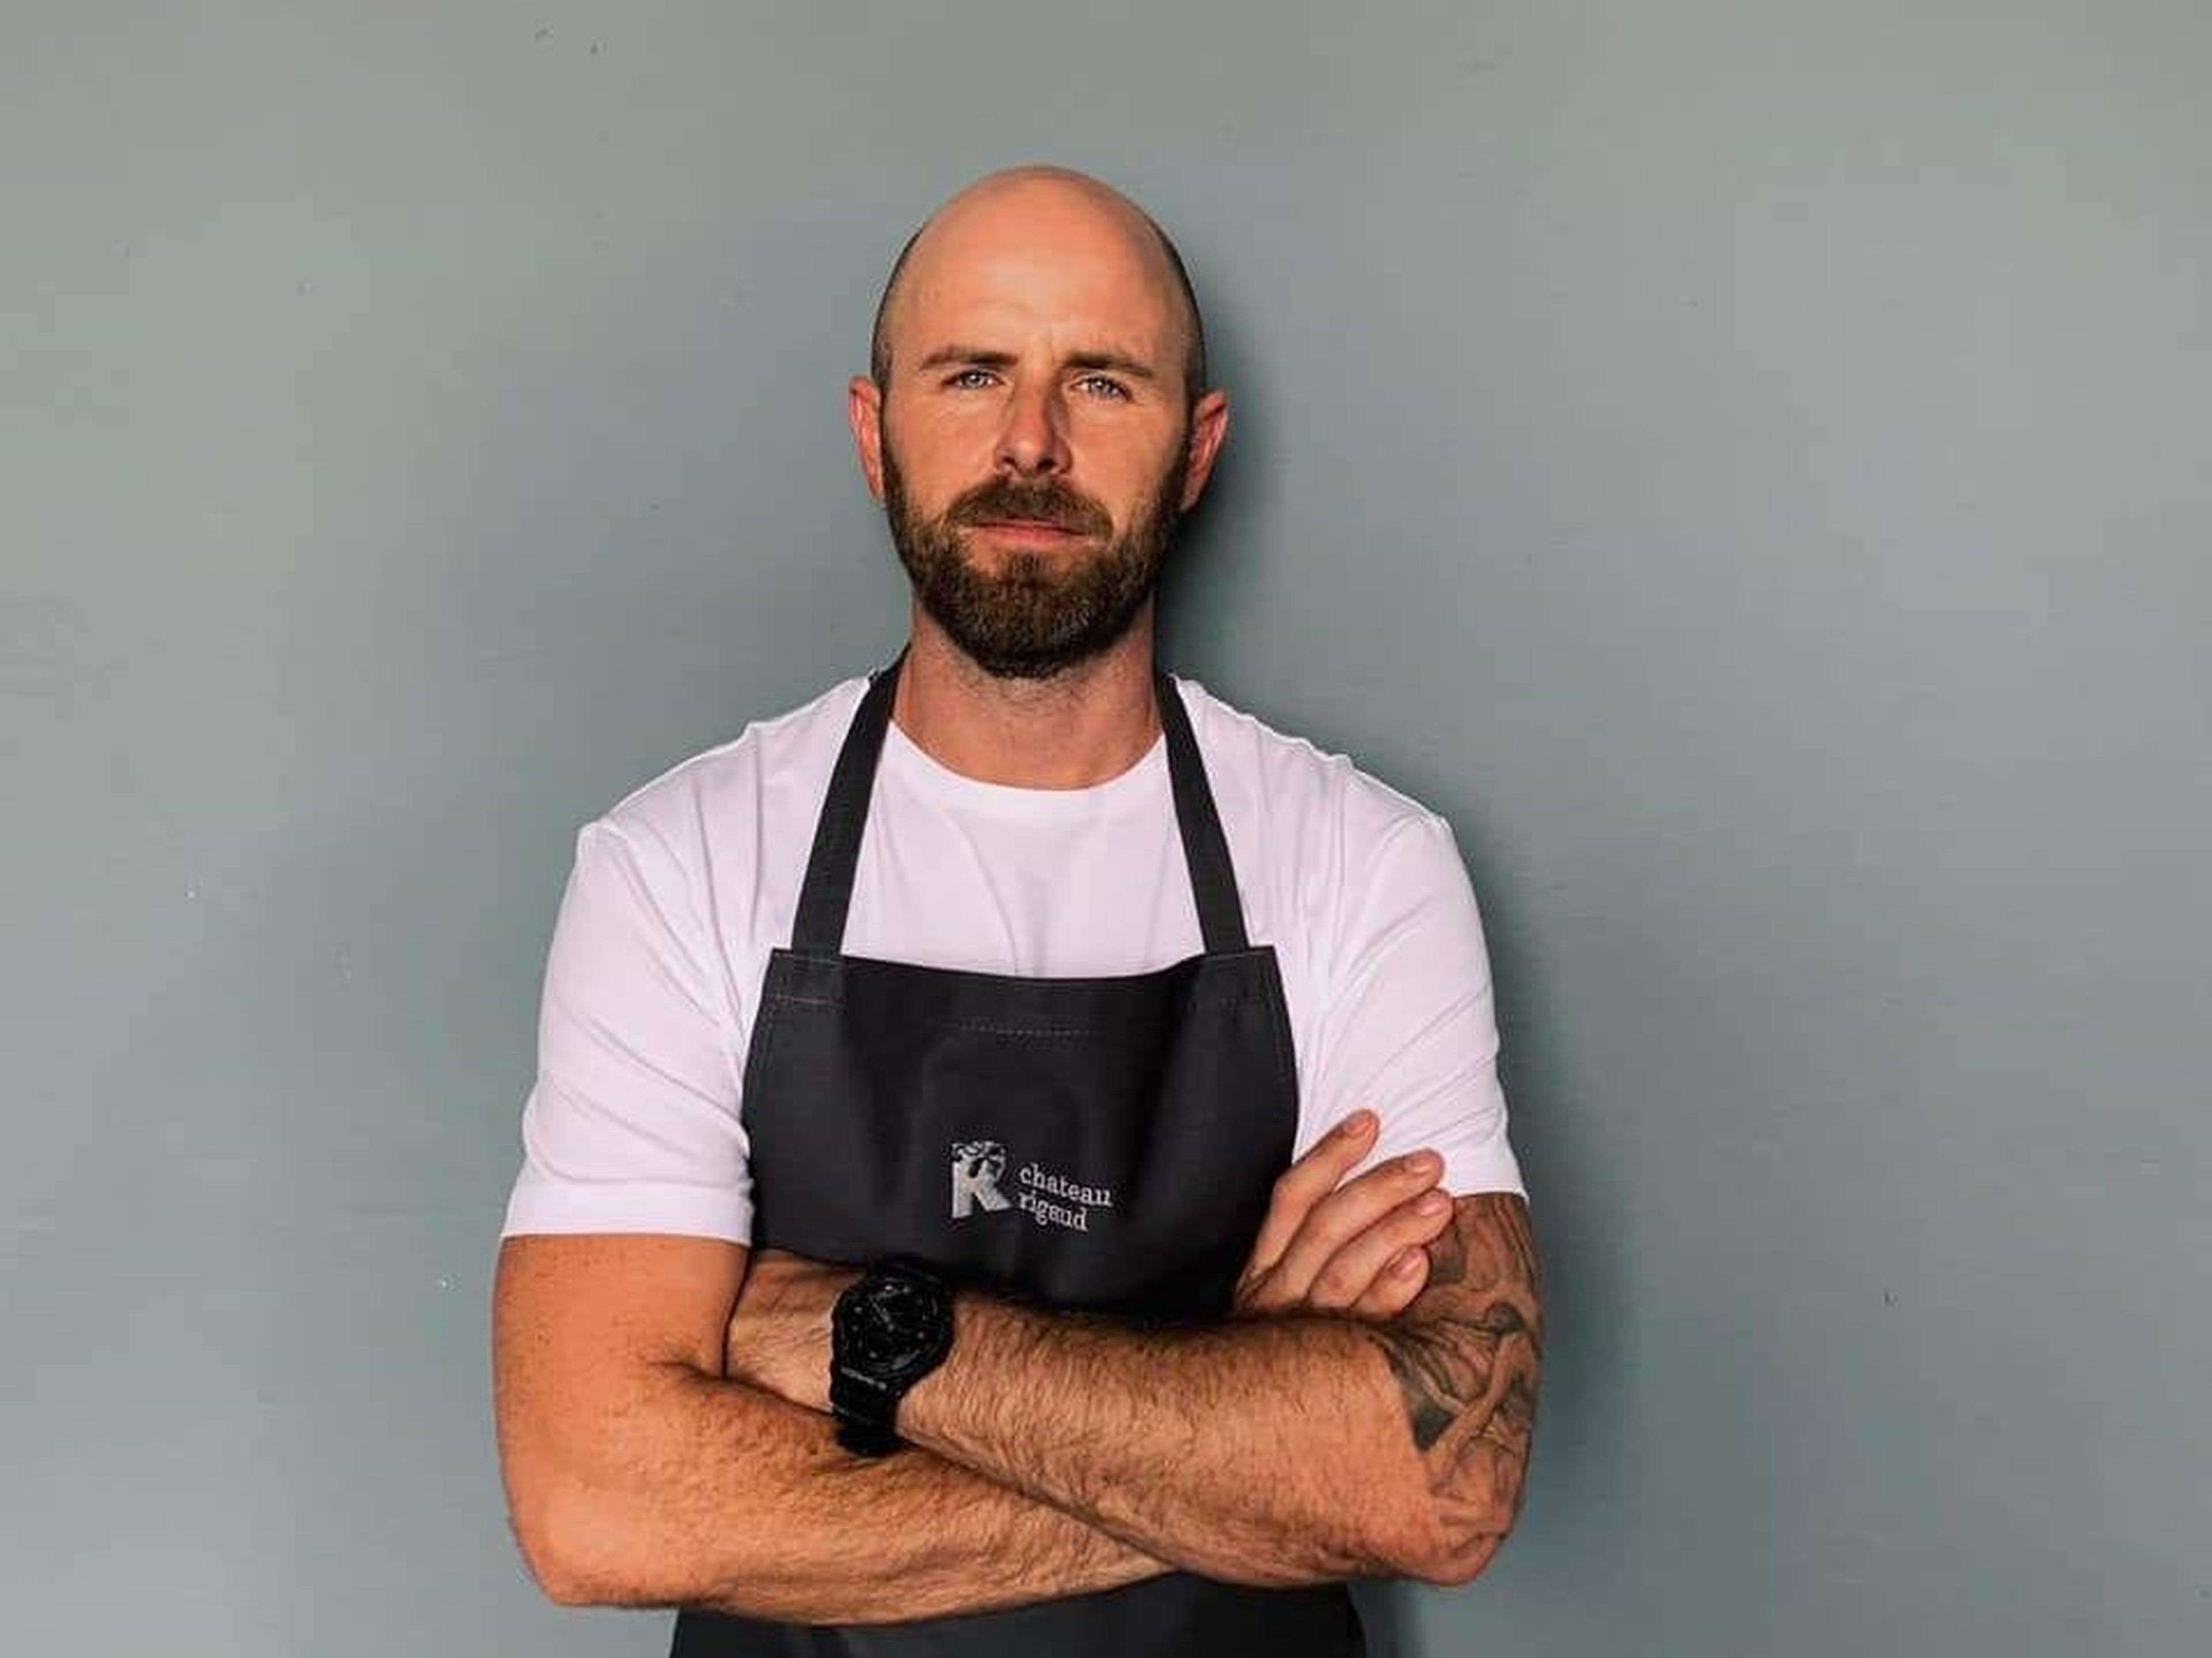 Nick Street-Brown has worked at Michelin-starred restaurants like Per Se in New York and is looking to transition into private food service.